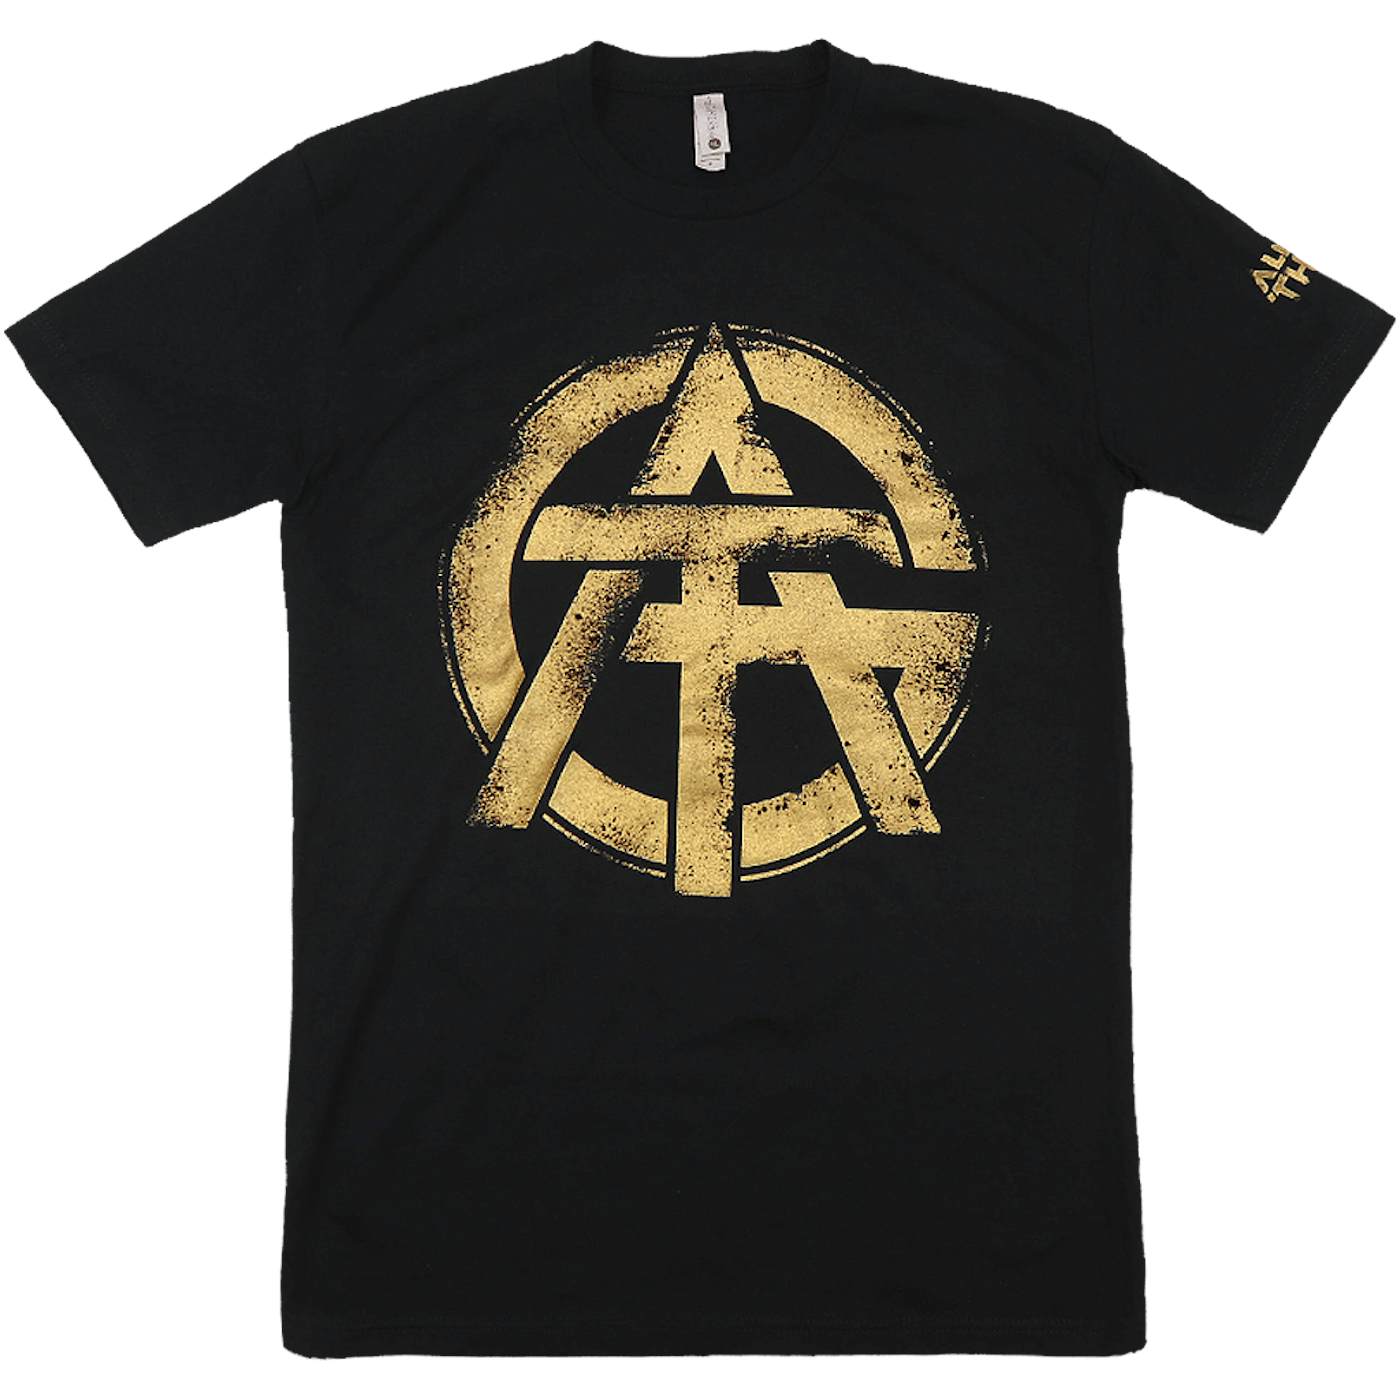 All Good Things - Black and Gold Logo Tee